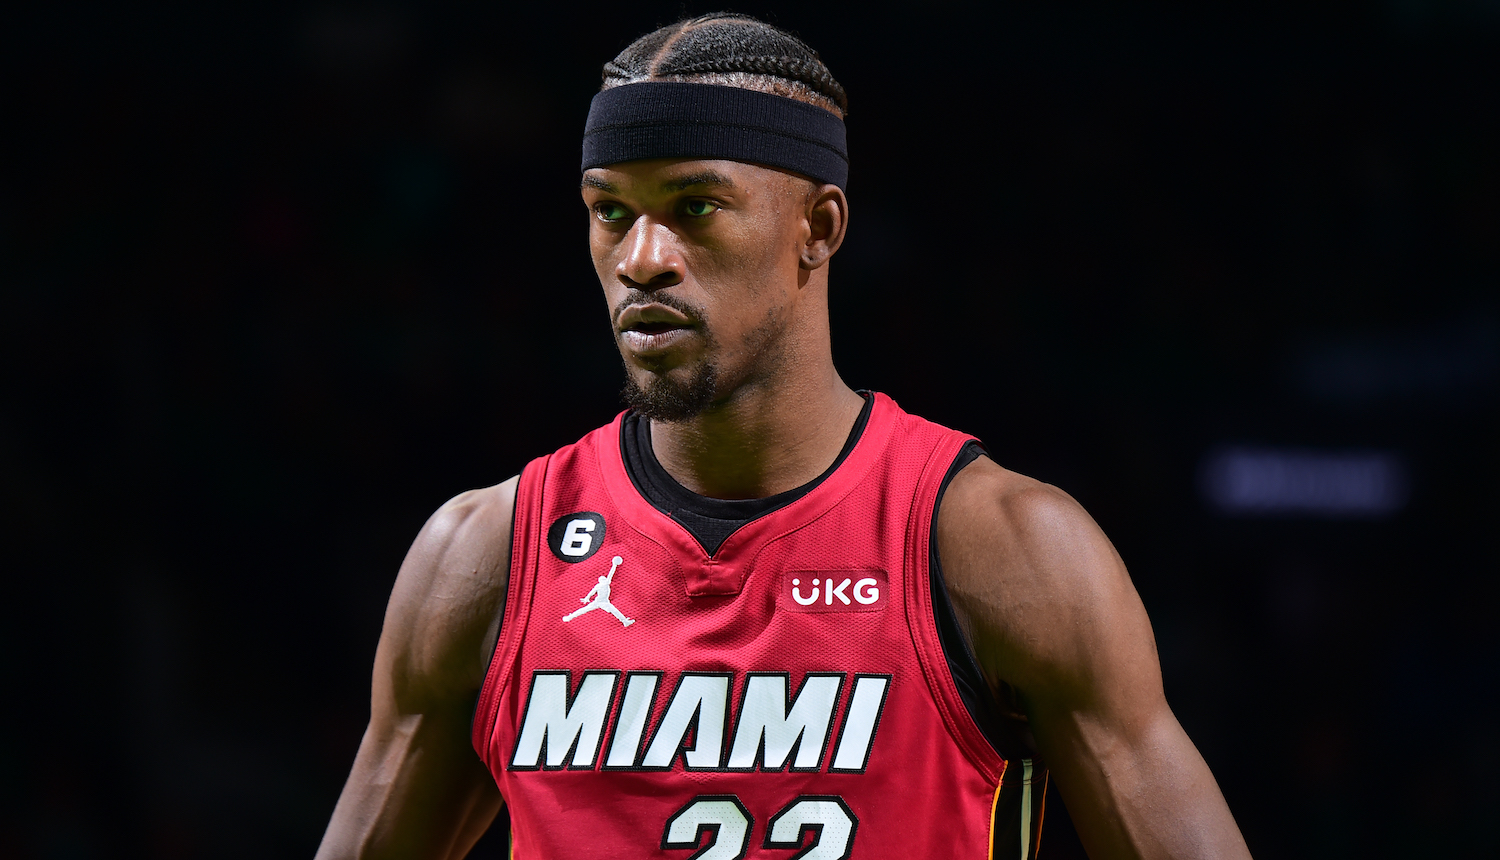 BOSTON, MA - MAY 17: Jimmy Butler #22 of the Miami Heat looks on during Game 1 of the Eastern Conference Finals 2023 NBA Playoffs on May 17, 2023 at the TD Garden in Boston, Massachusetts. NOTE TO USER: User expressly acknowledges and agrees that, by downloading and or using this photograph, User is consenting to the terms and conditions of the Getty Images License Agreement. Mandatory Copyright Notice: Copyright 2023 NBAE (Photo by Brian Babineau/NBAE via Getty Images)